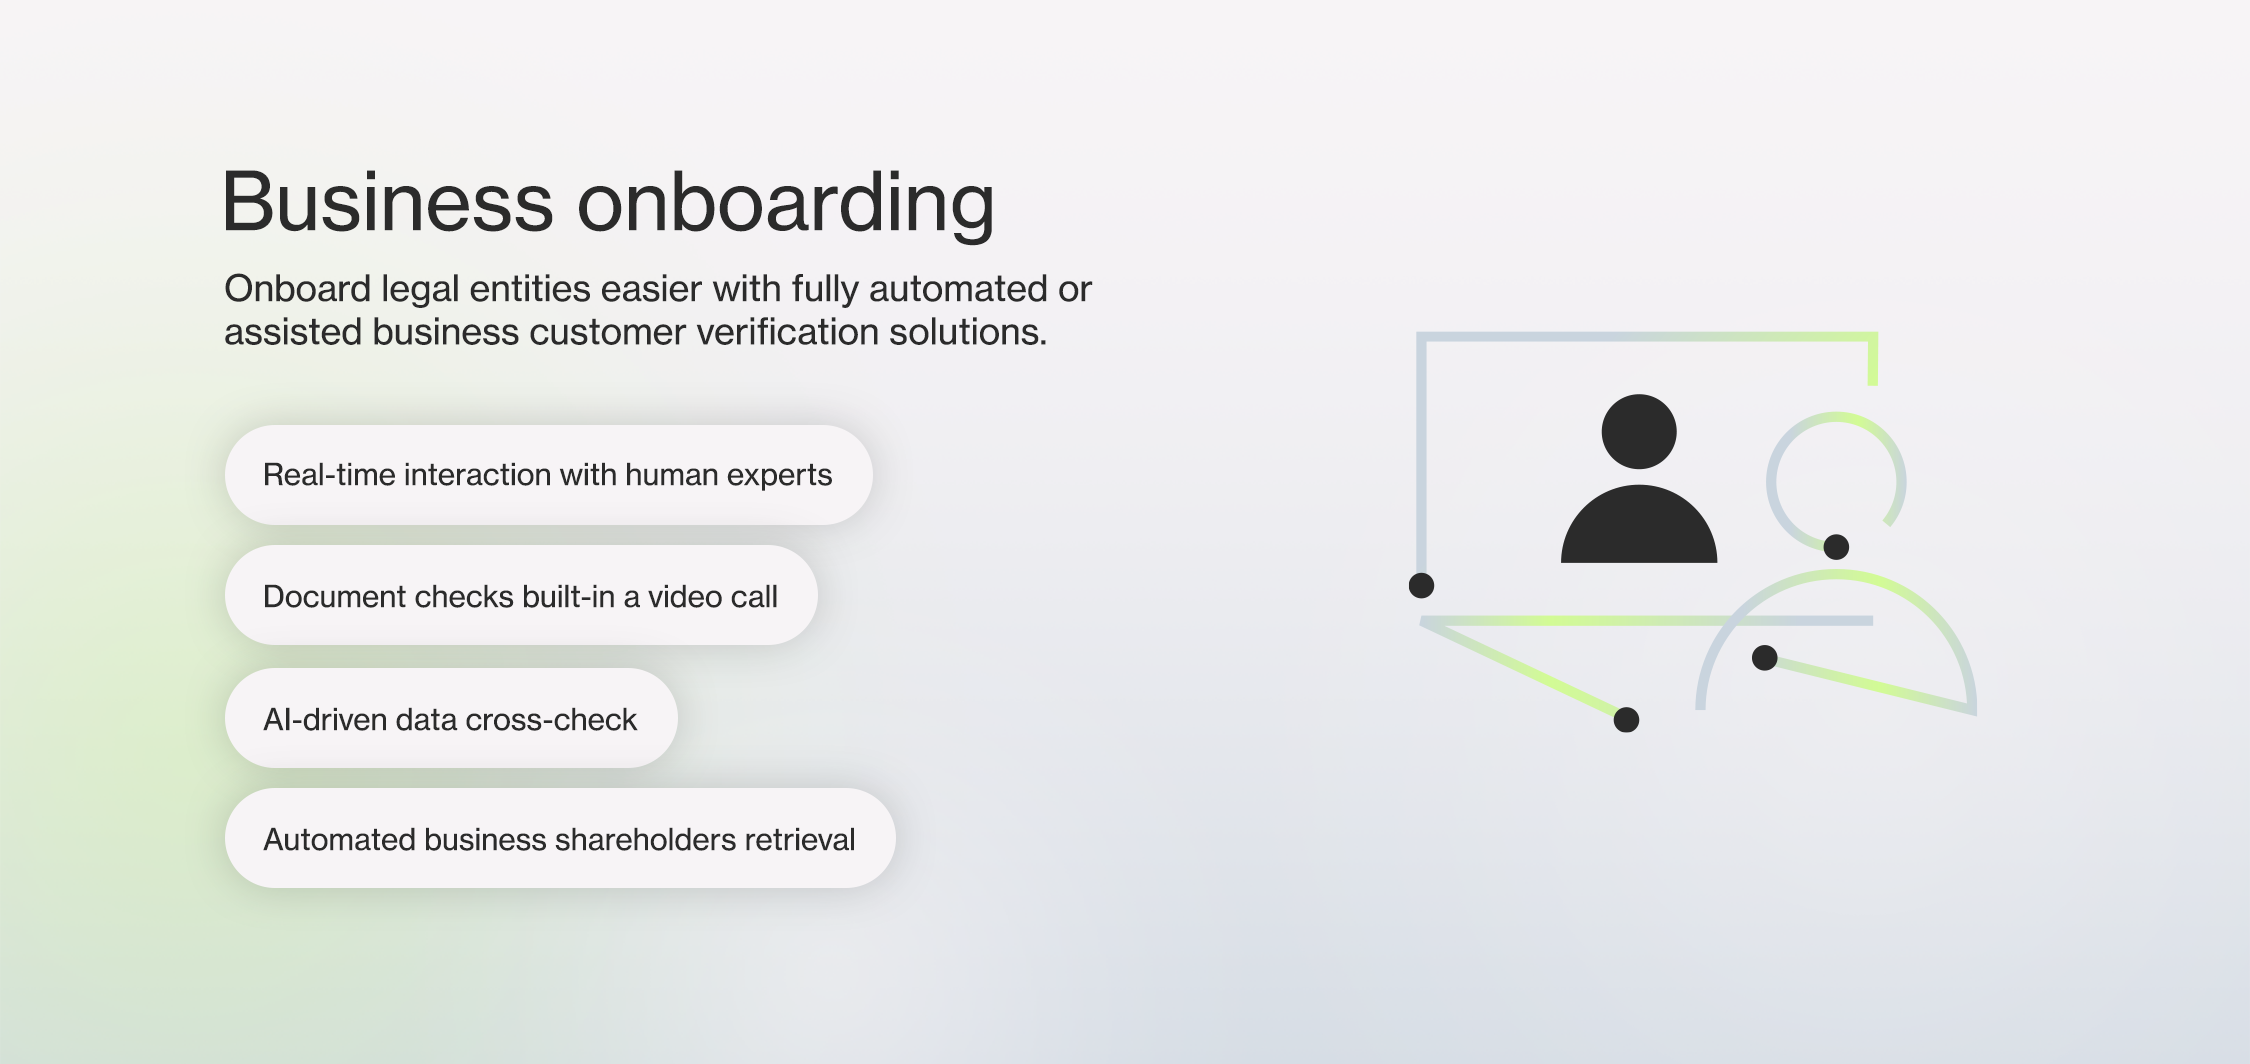 Onboard legal entities easier with fully automated or assisted business customer verification solutions.